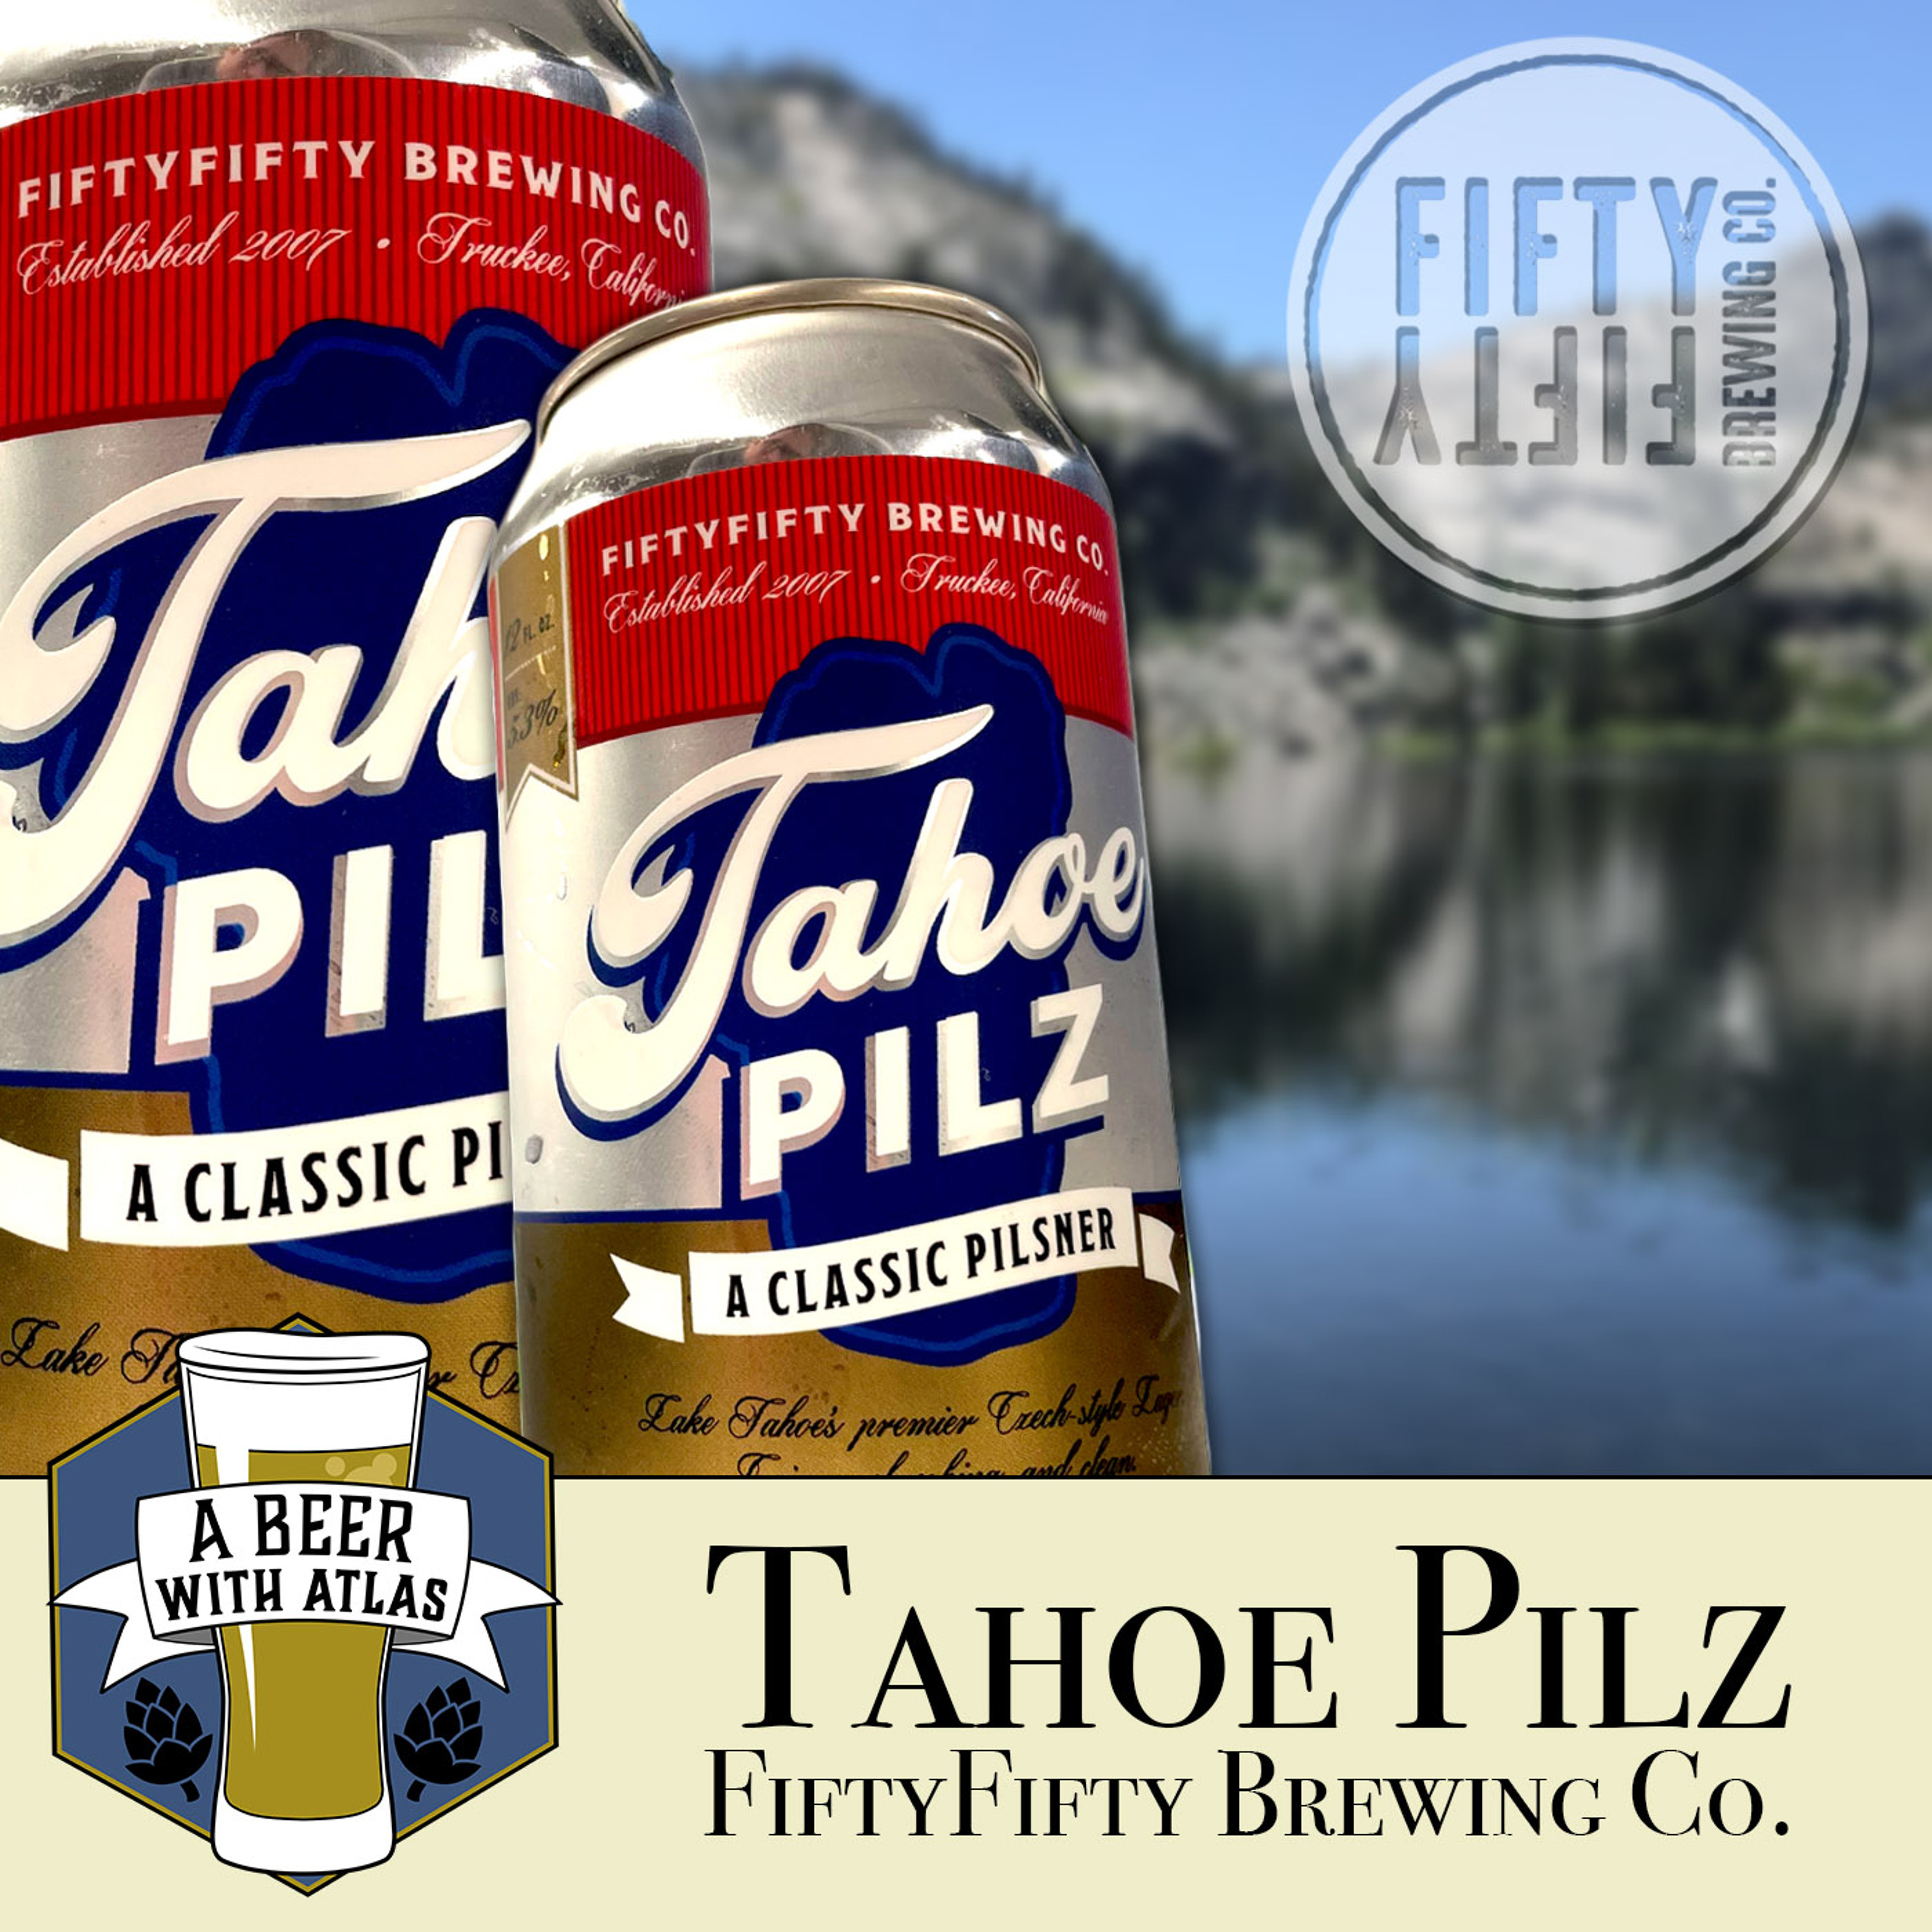 Tahoe Pilz by FiftyFifty Brewing Company - A Beer with Atlas 201